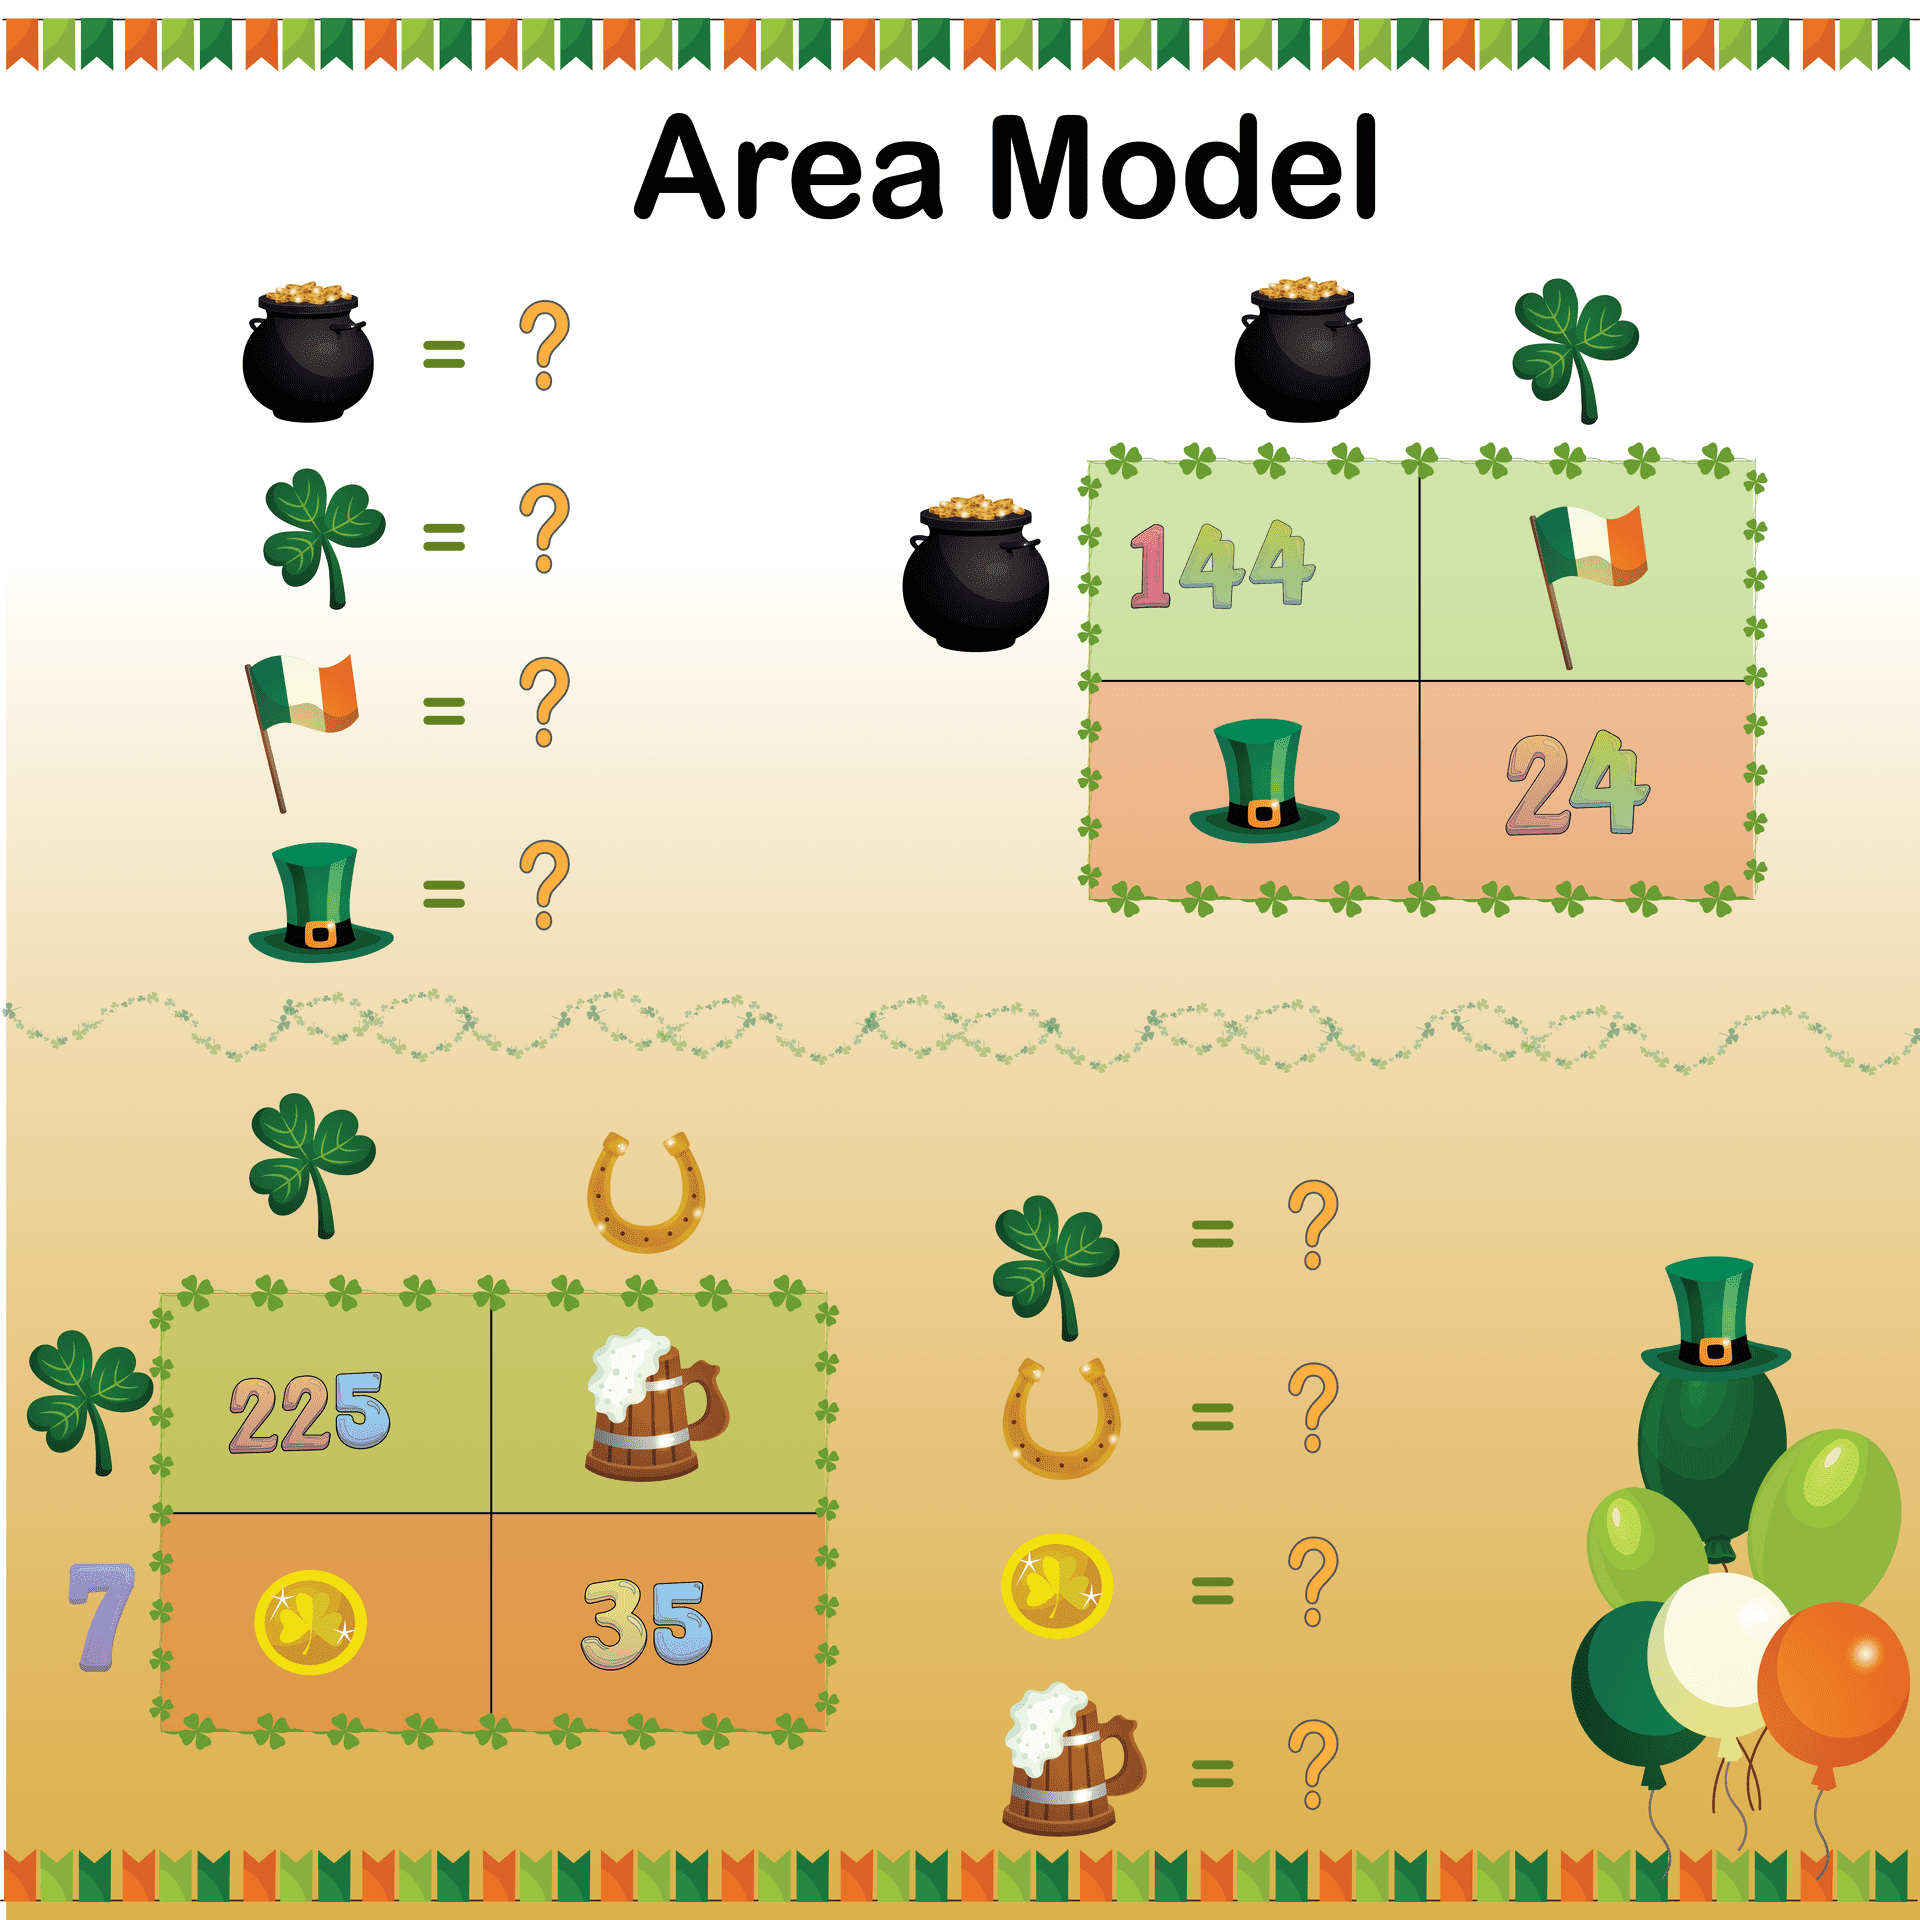 Using Area Model as An Example of St. Patrick's Day Mutliplication